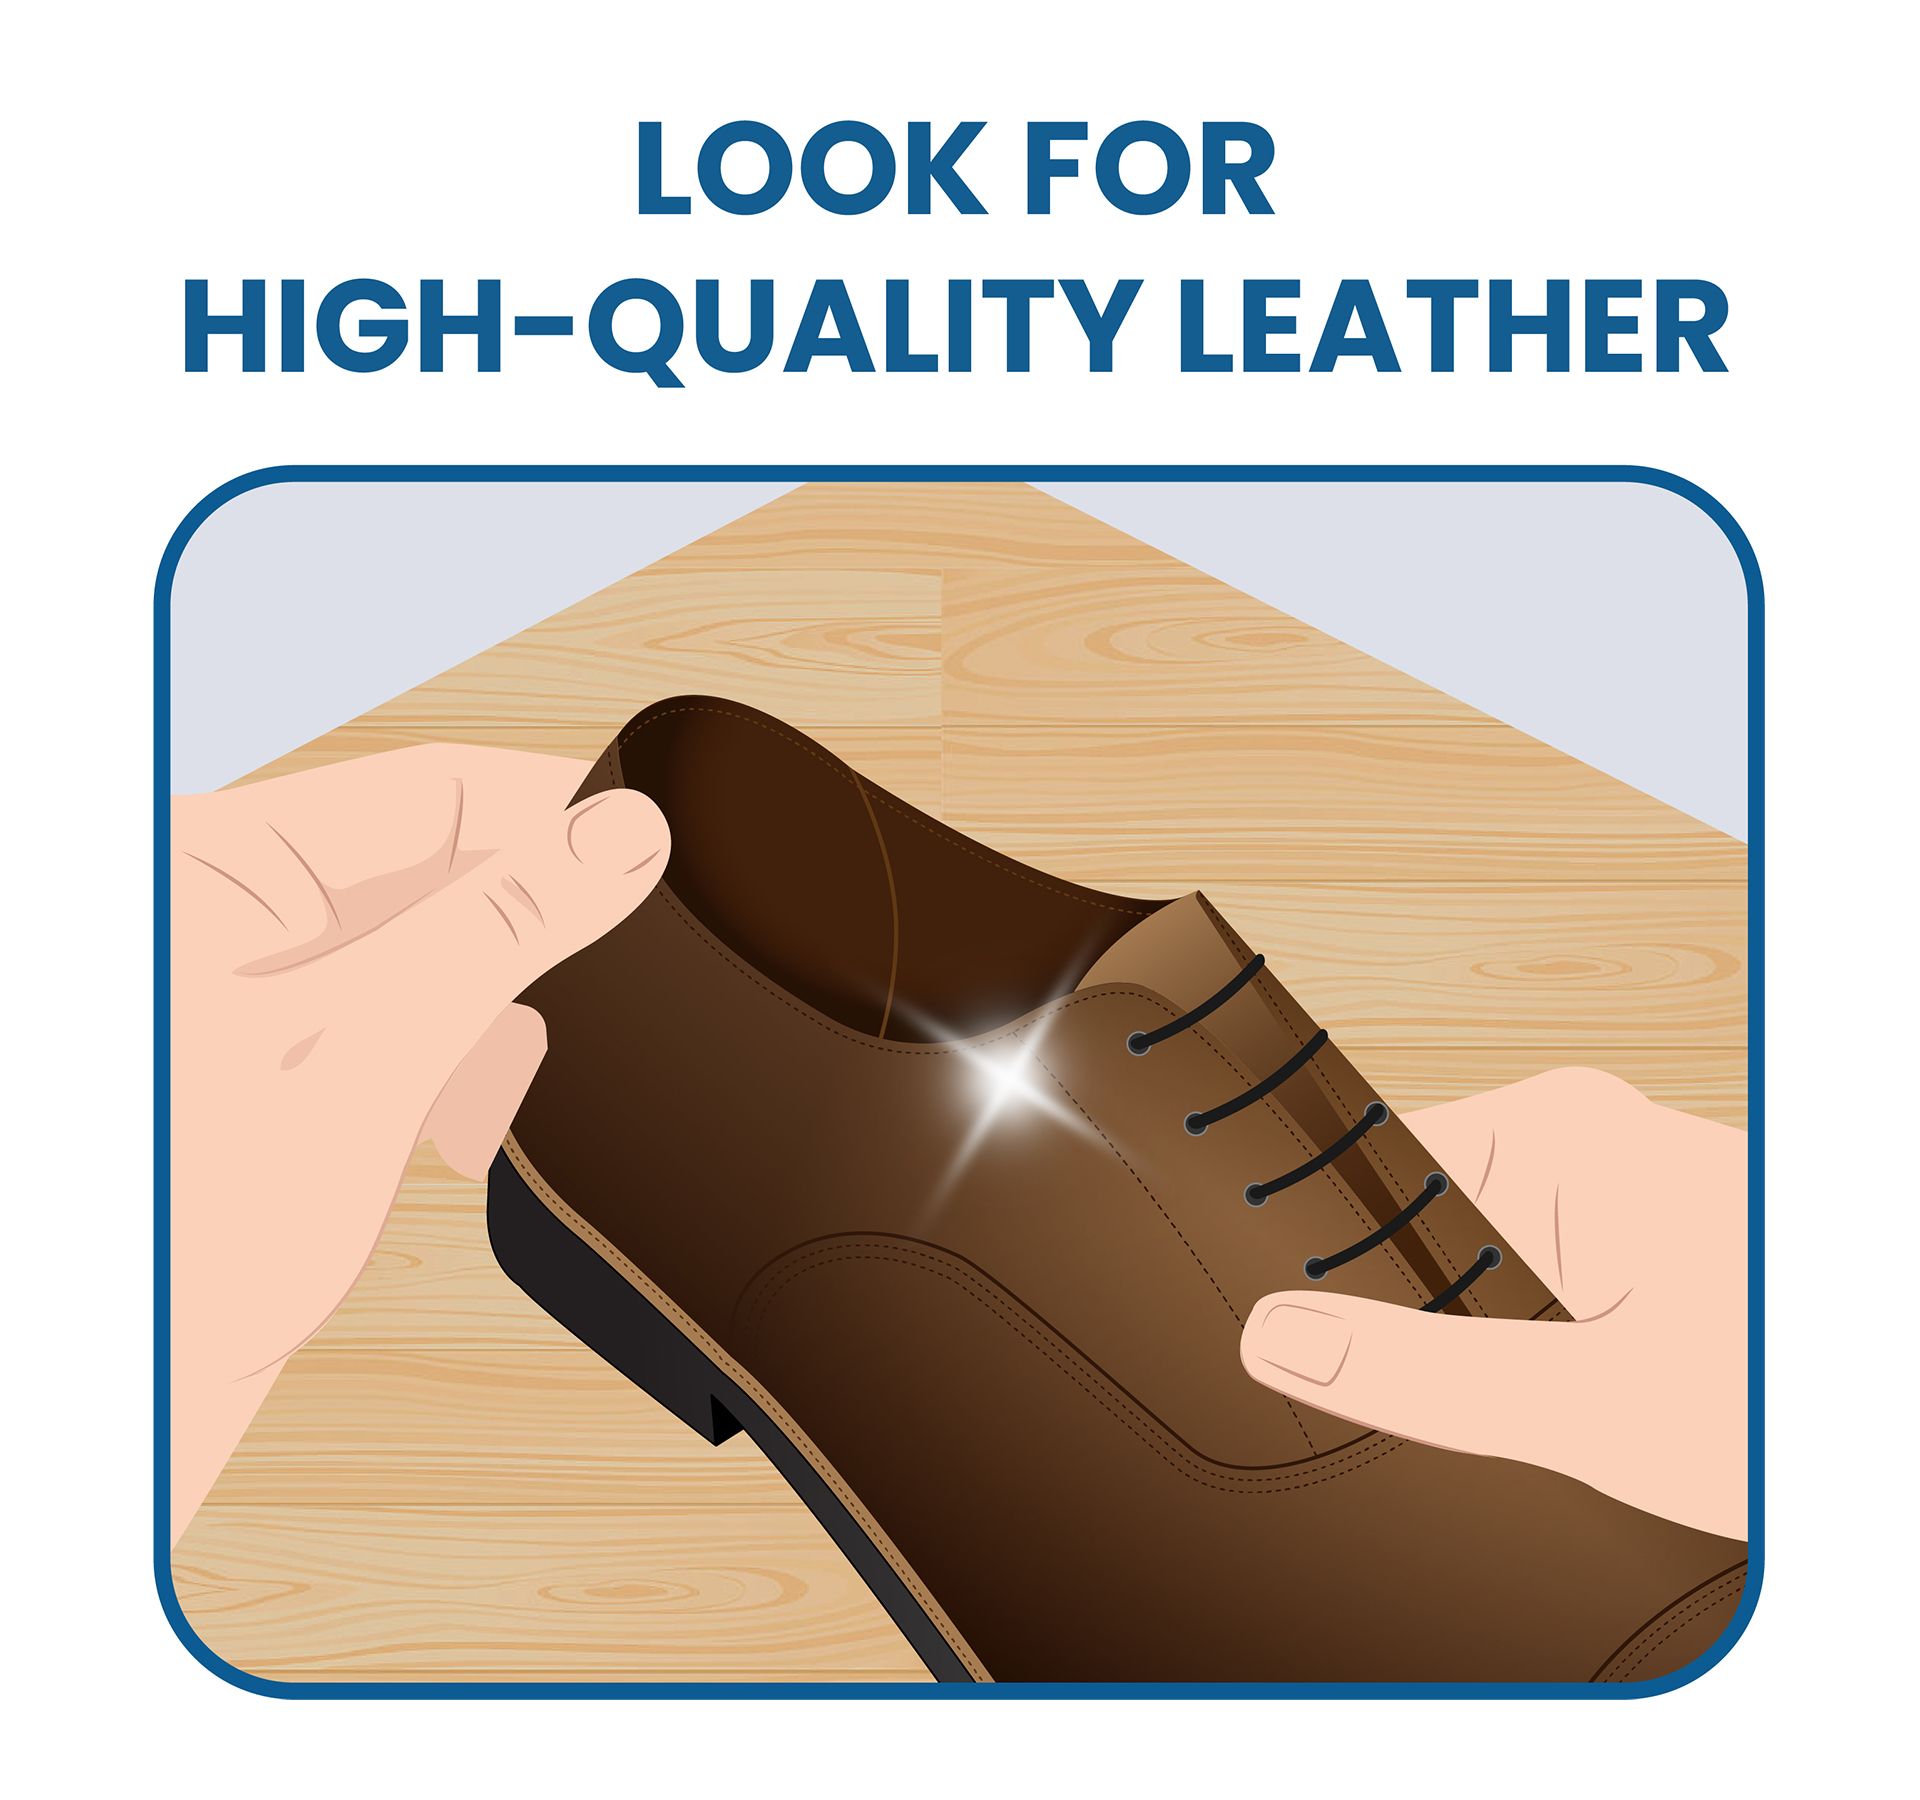 look for high-quality leather dress shoe